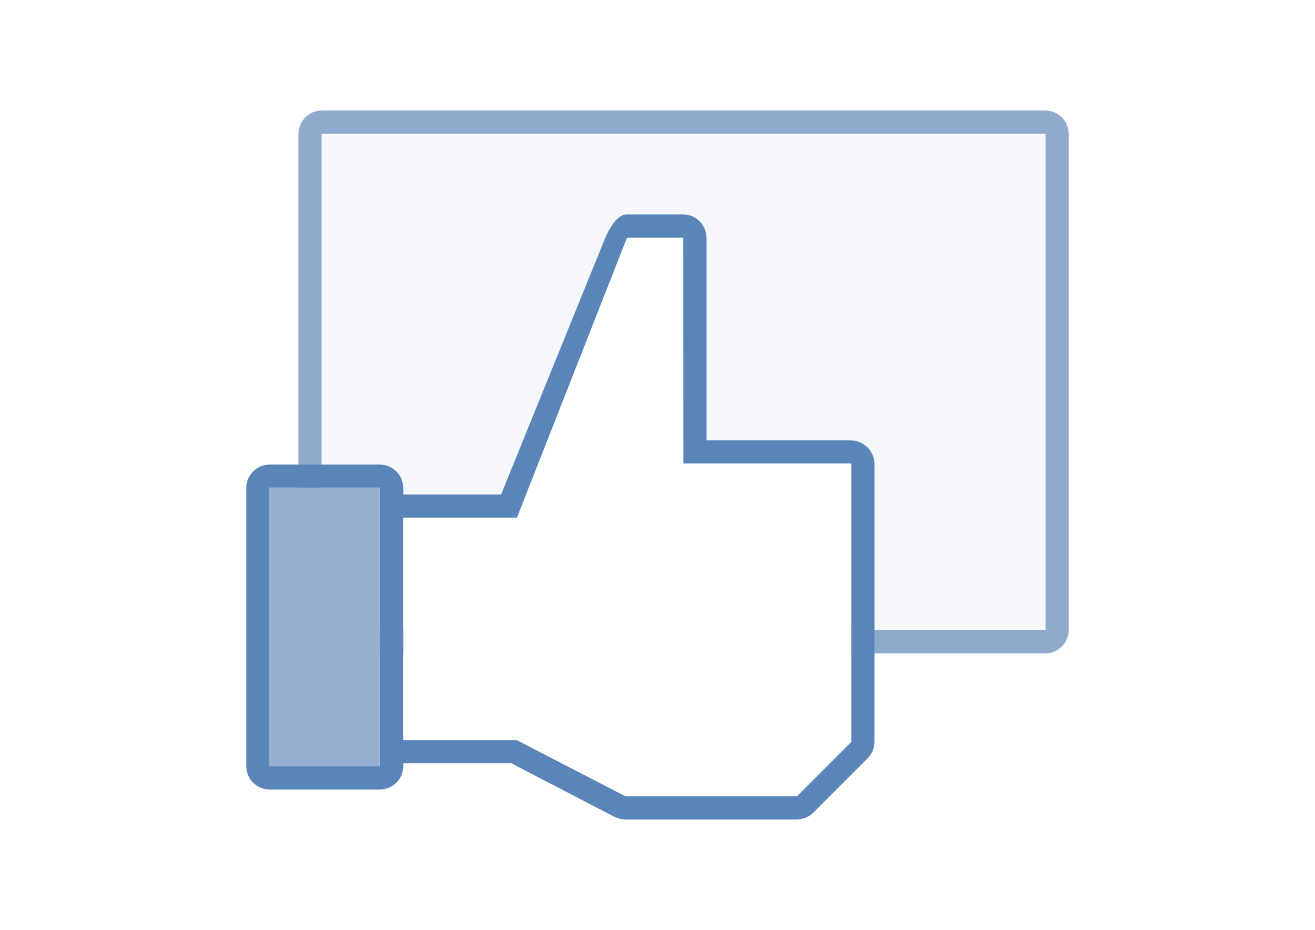 Facebook Like Icon Png #4162 - Free Icons and PNG Backgrounds